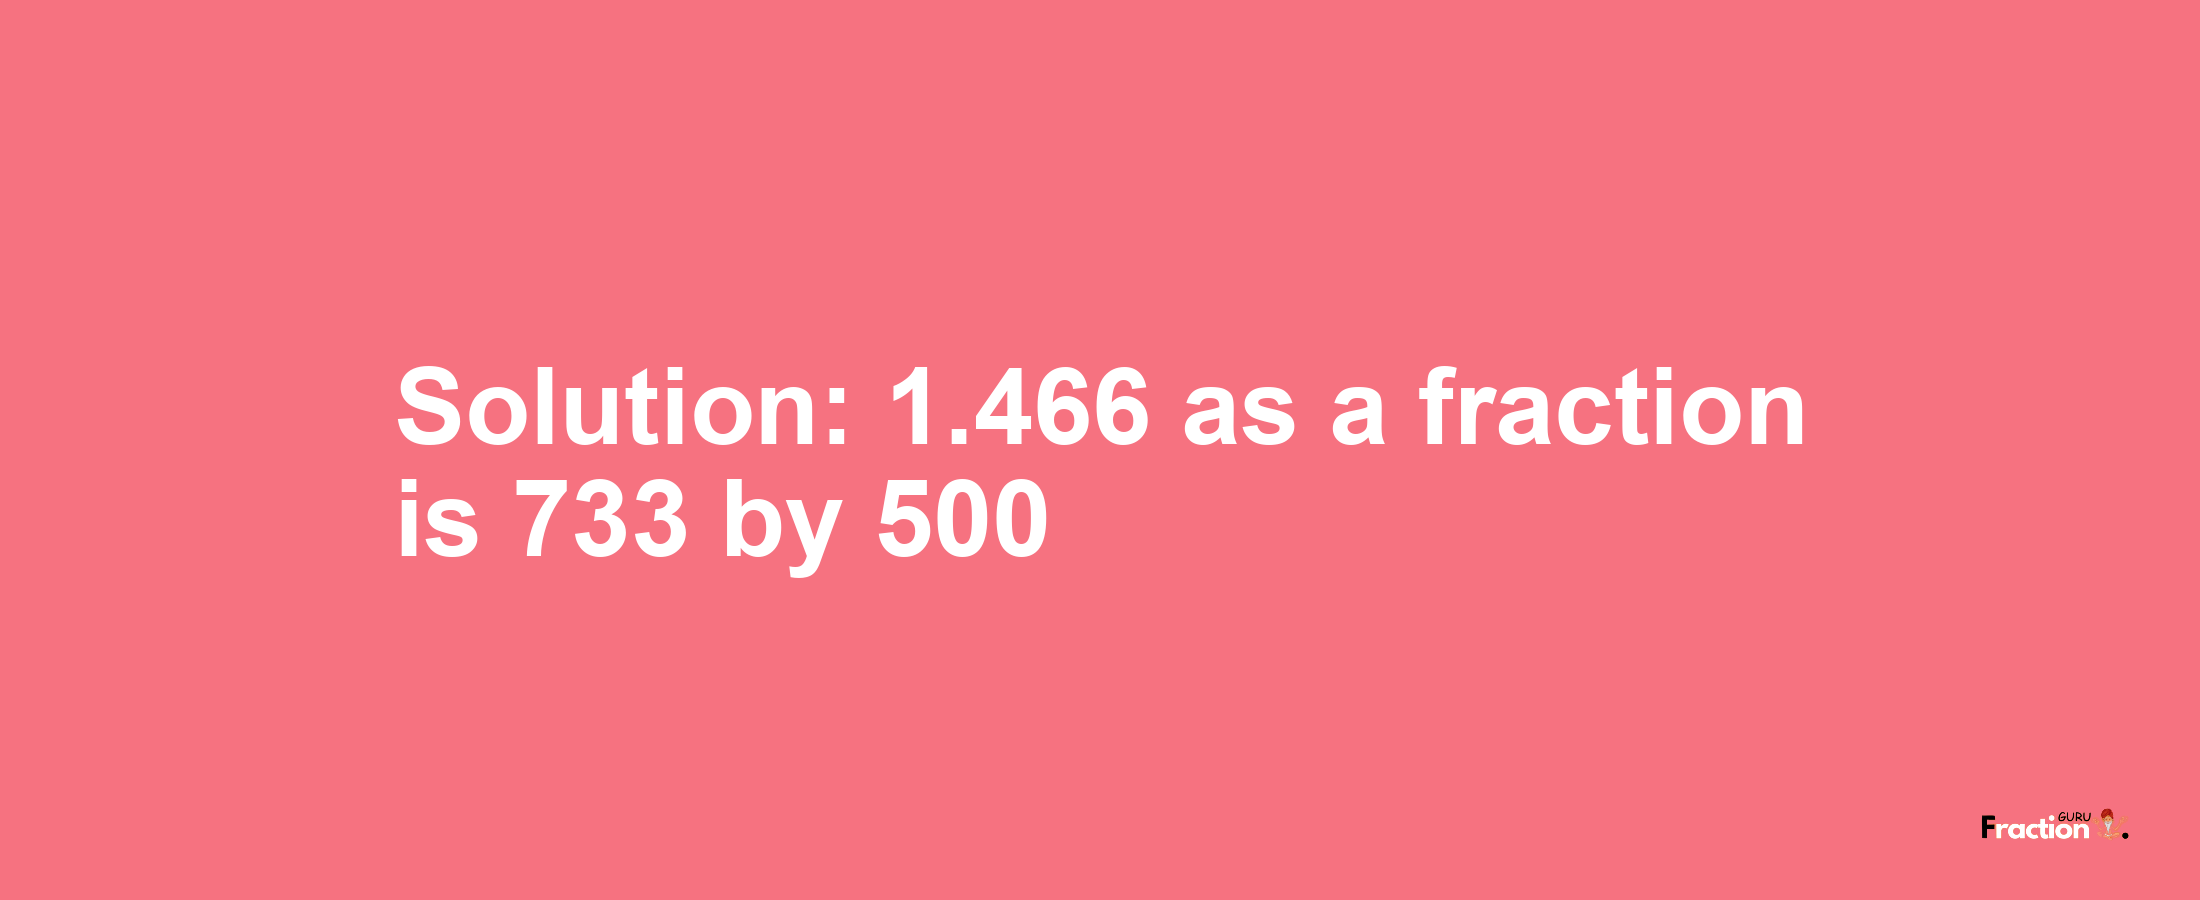 Solution:1.466 as a fraction is 733/500